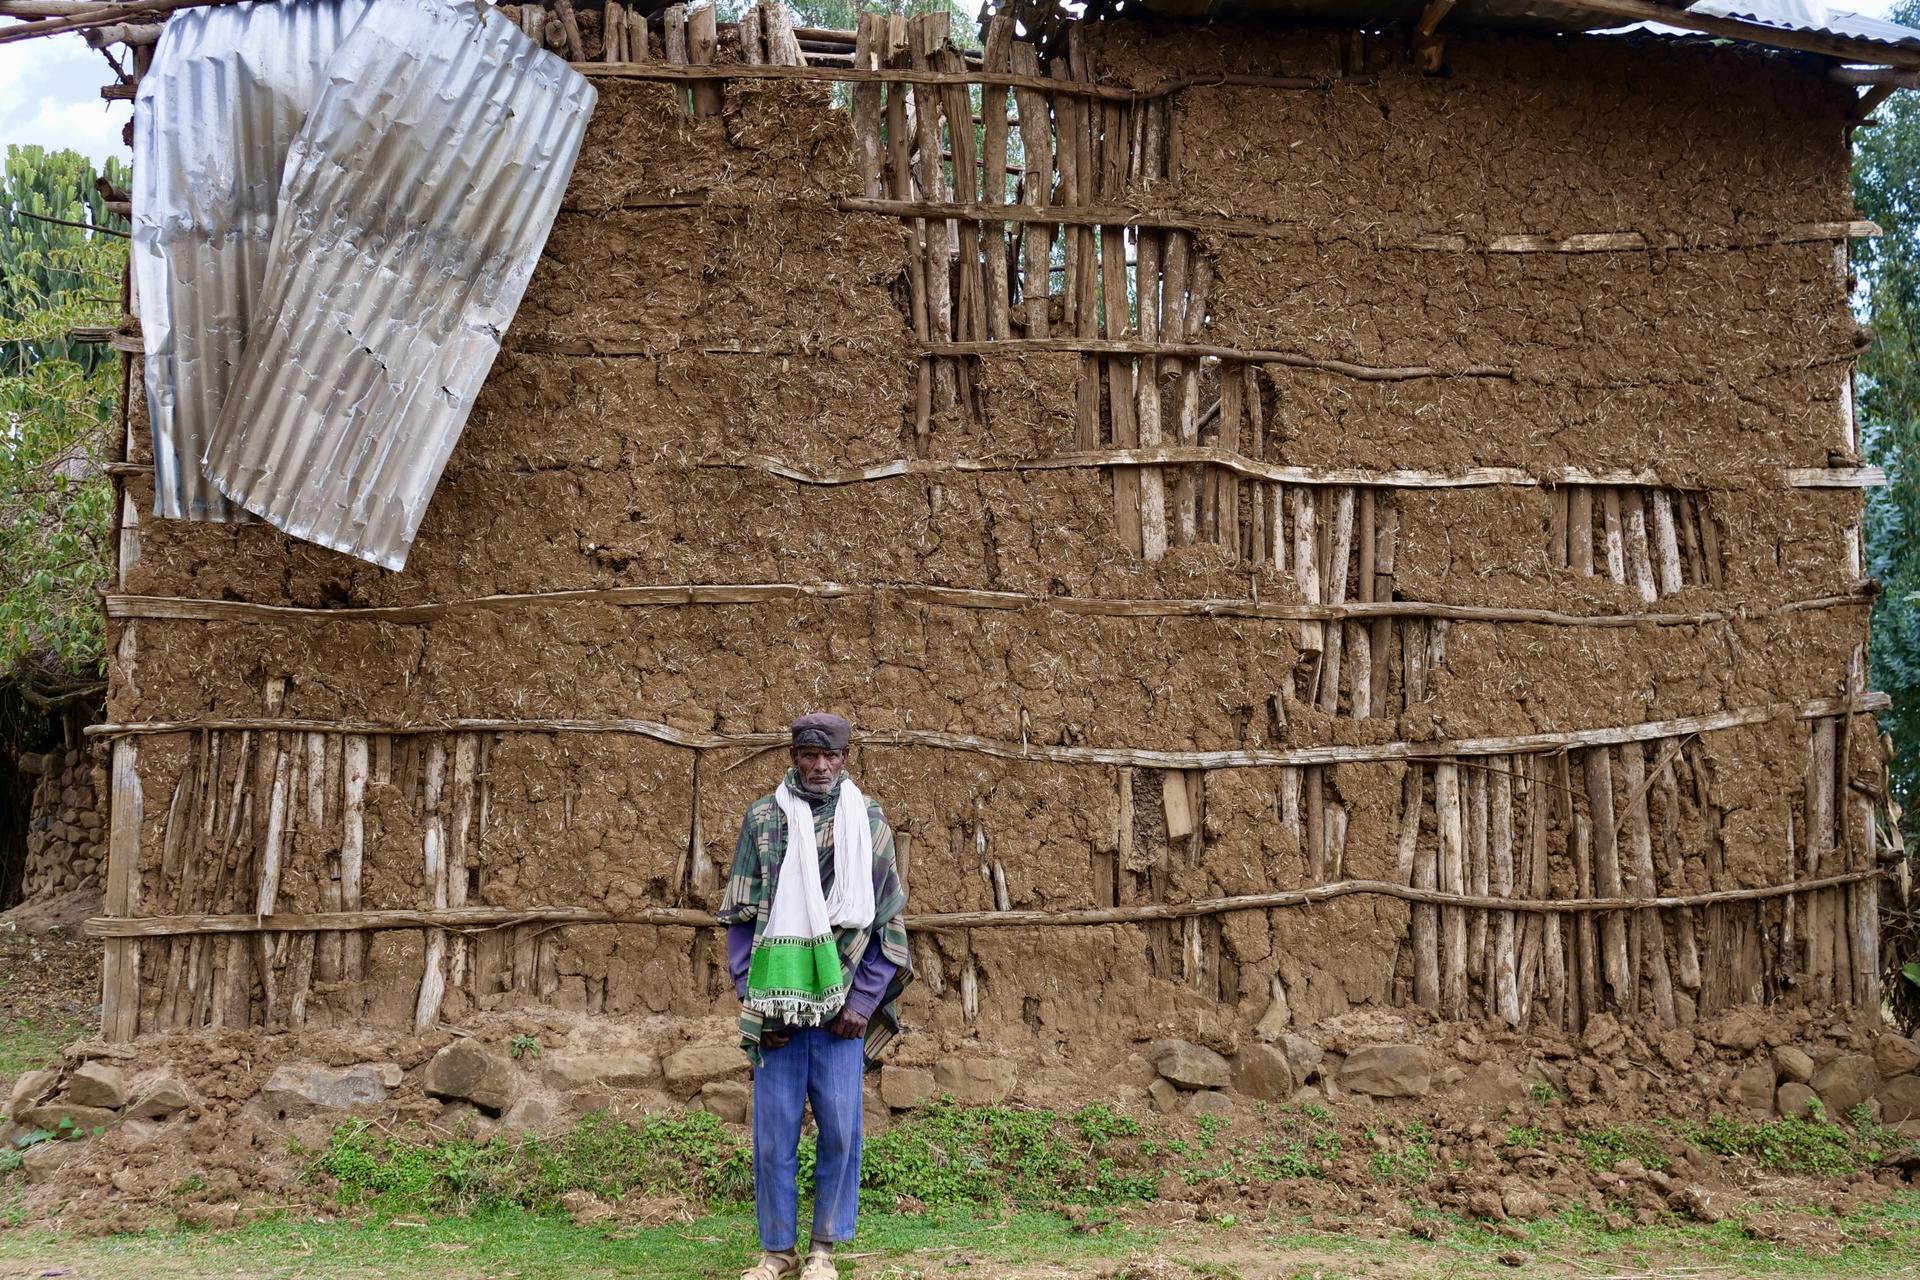 Farmer Gashaw Demise stands in front of his home, which was partially damaged during the conflict. His family was killed when the house was struck by a weapon, Amhara, Ethiopia, Feb. 17, 2022.